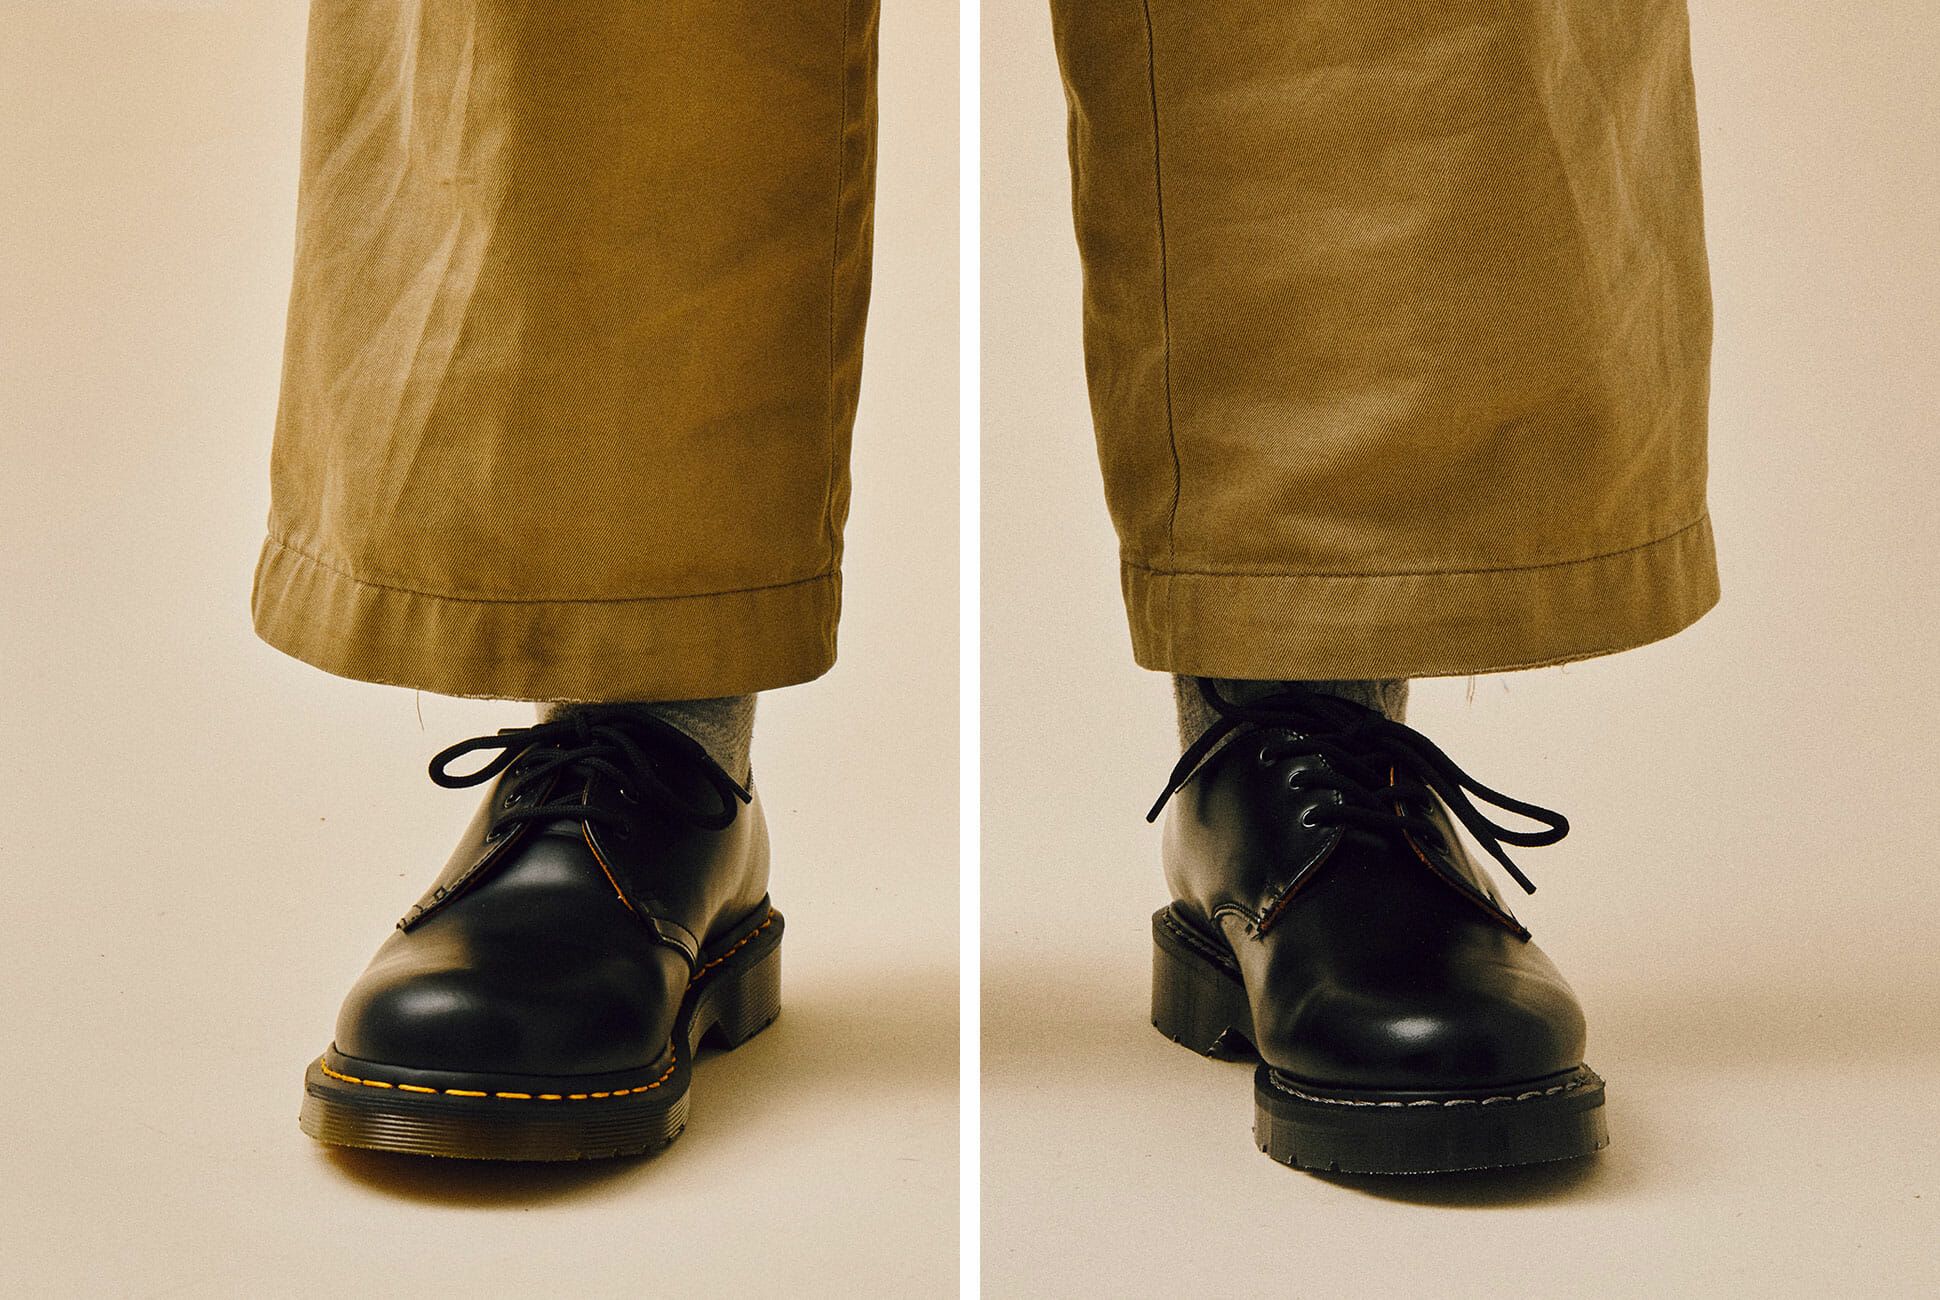 Dr. Martens Vs. Solovair Shoes: Which Pair Should You Get? • Gear Patrol